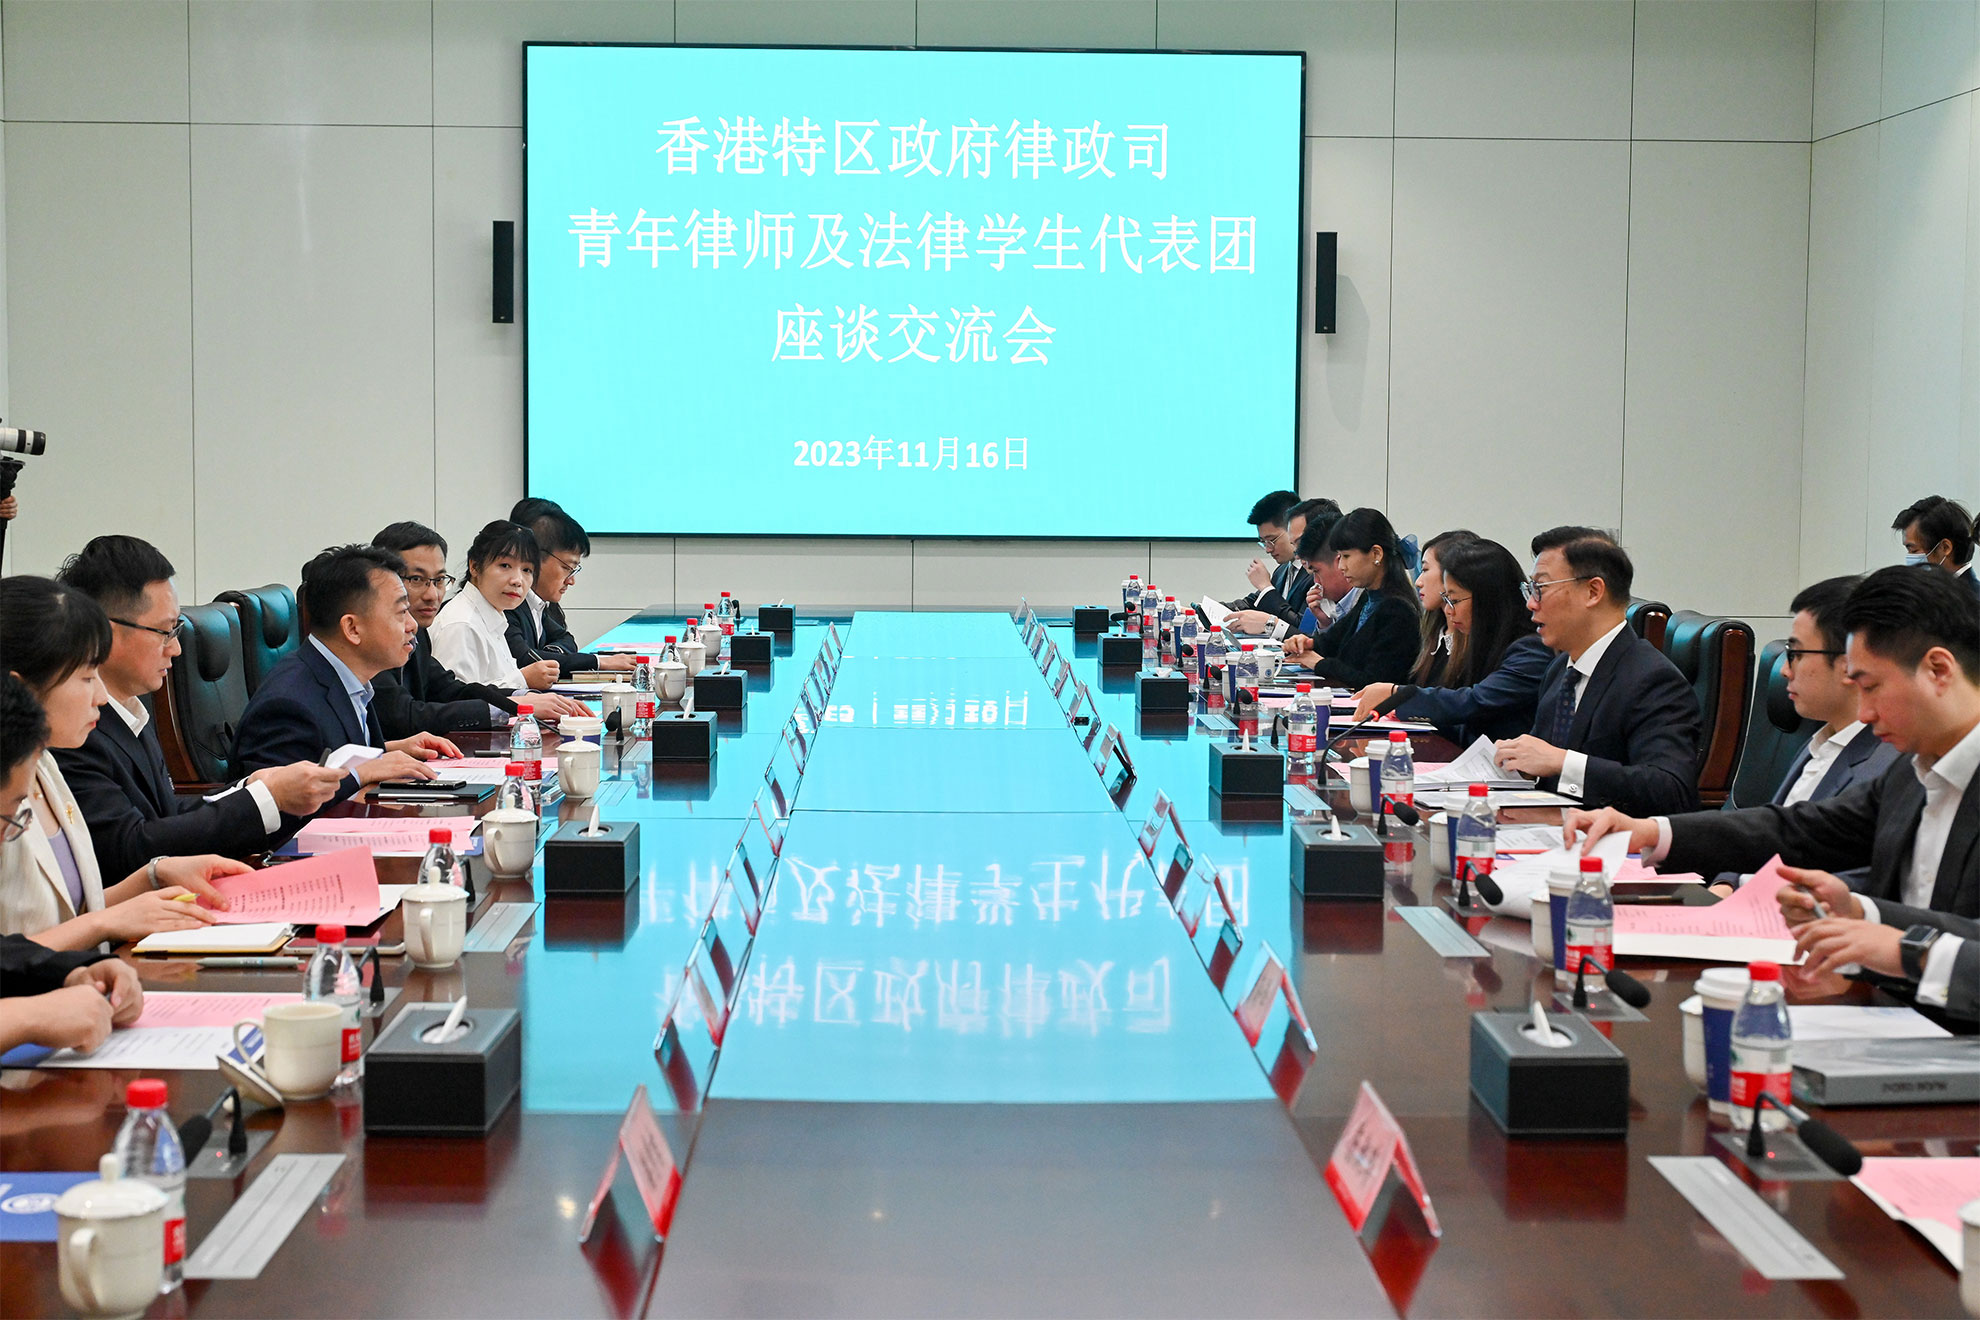 The Deputy Secretary for Justice, Mr Cheung Kwok-kwan, and a delegation of young lawyers led by him today (November 17) finished the first stop, Shenzhen, of their visit to Mainland cities of the Greater Bay Area. Photo shows Mr Cheung (third right) and other members of the delegation meeting with the President of the Shenzhen Qianhai Cooperation Zone People's Court, Mr Bian Fei (third left).